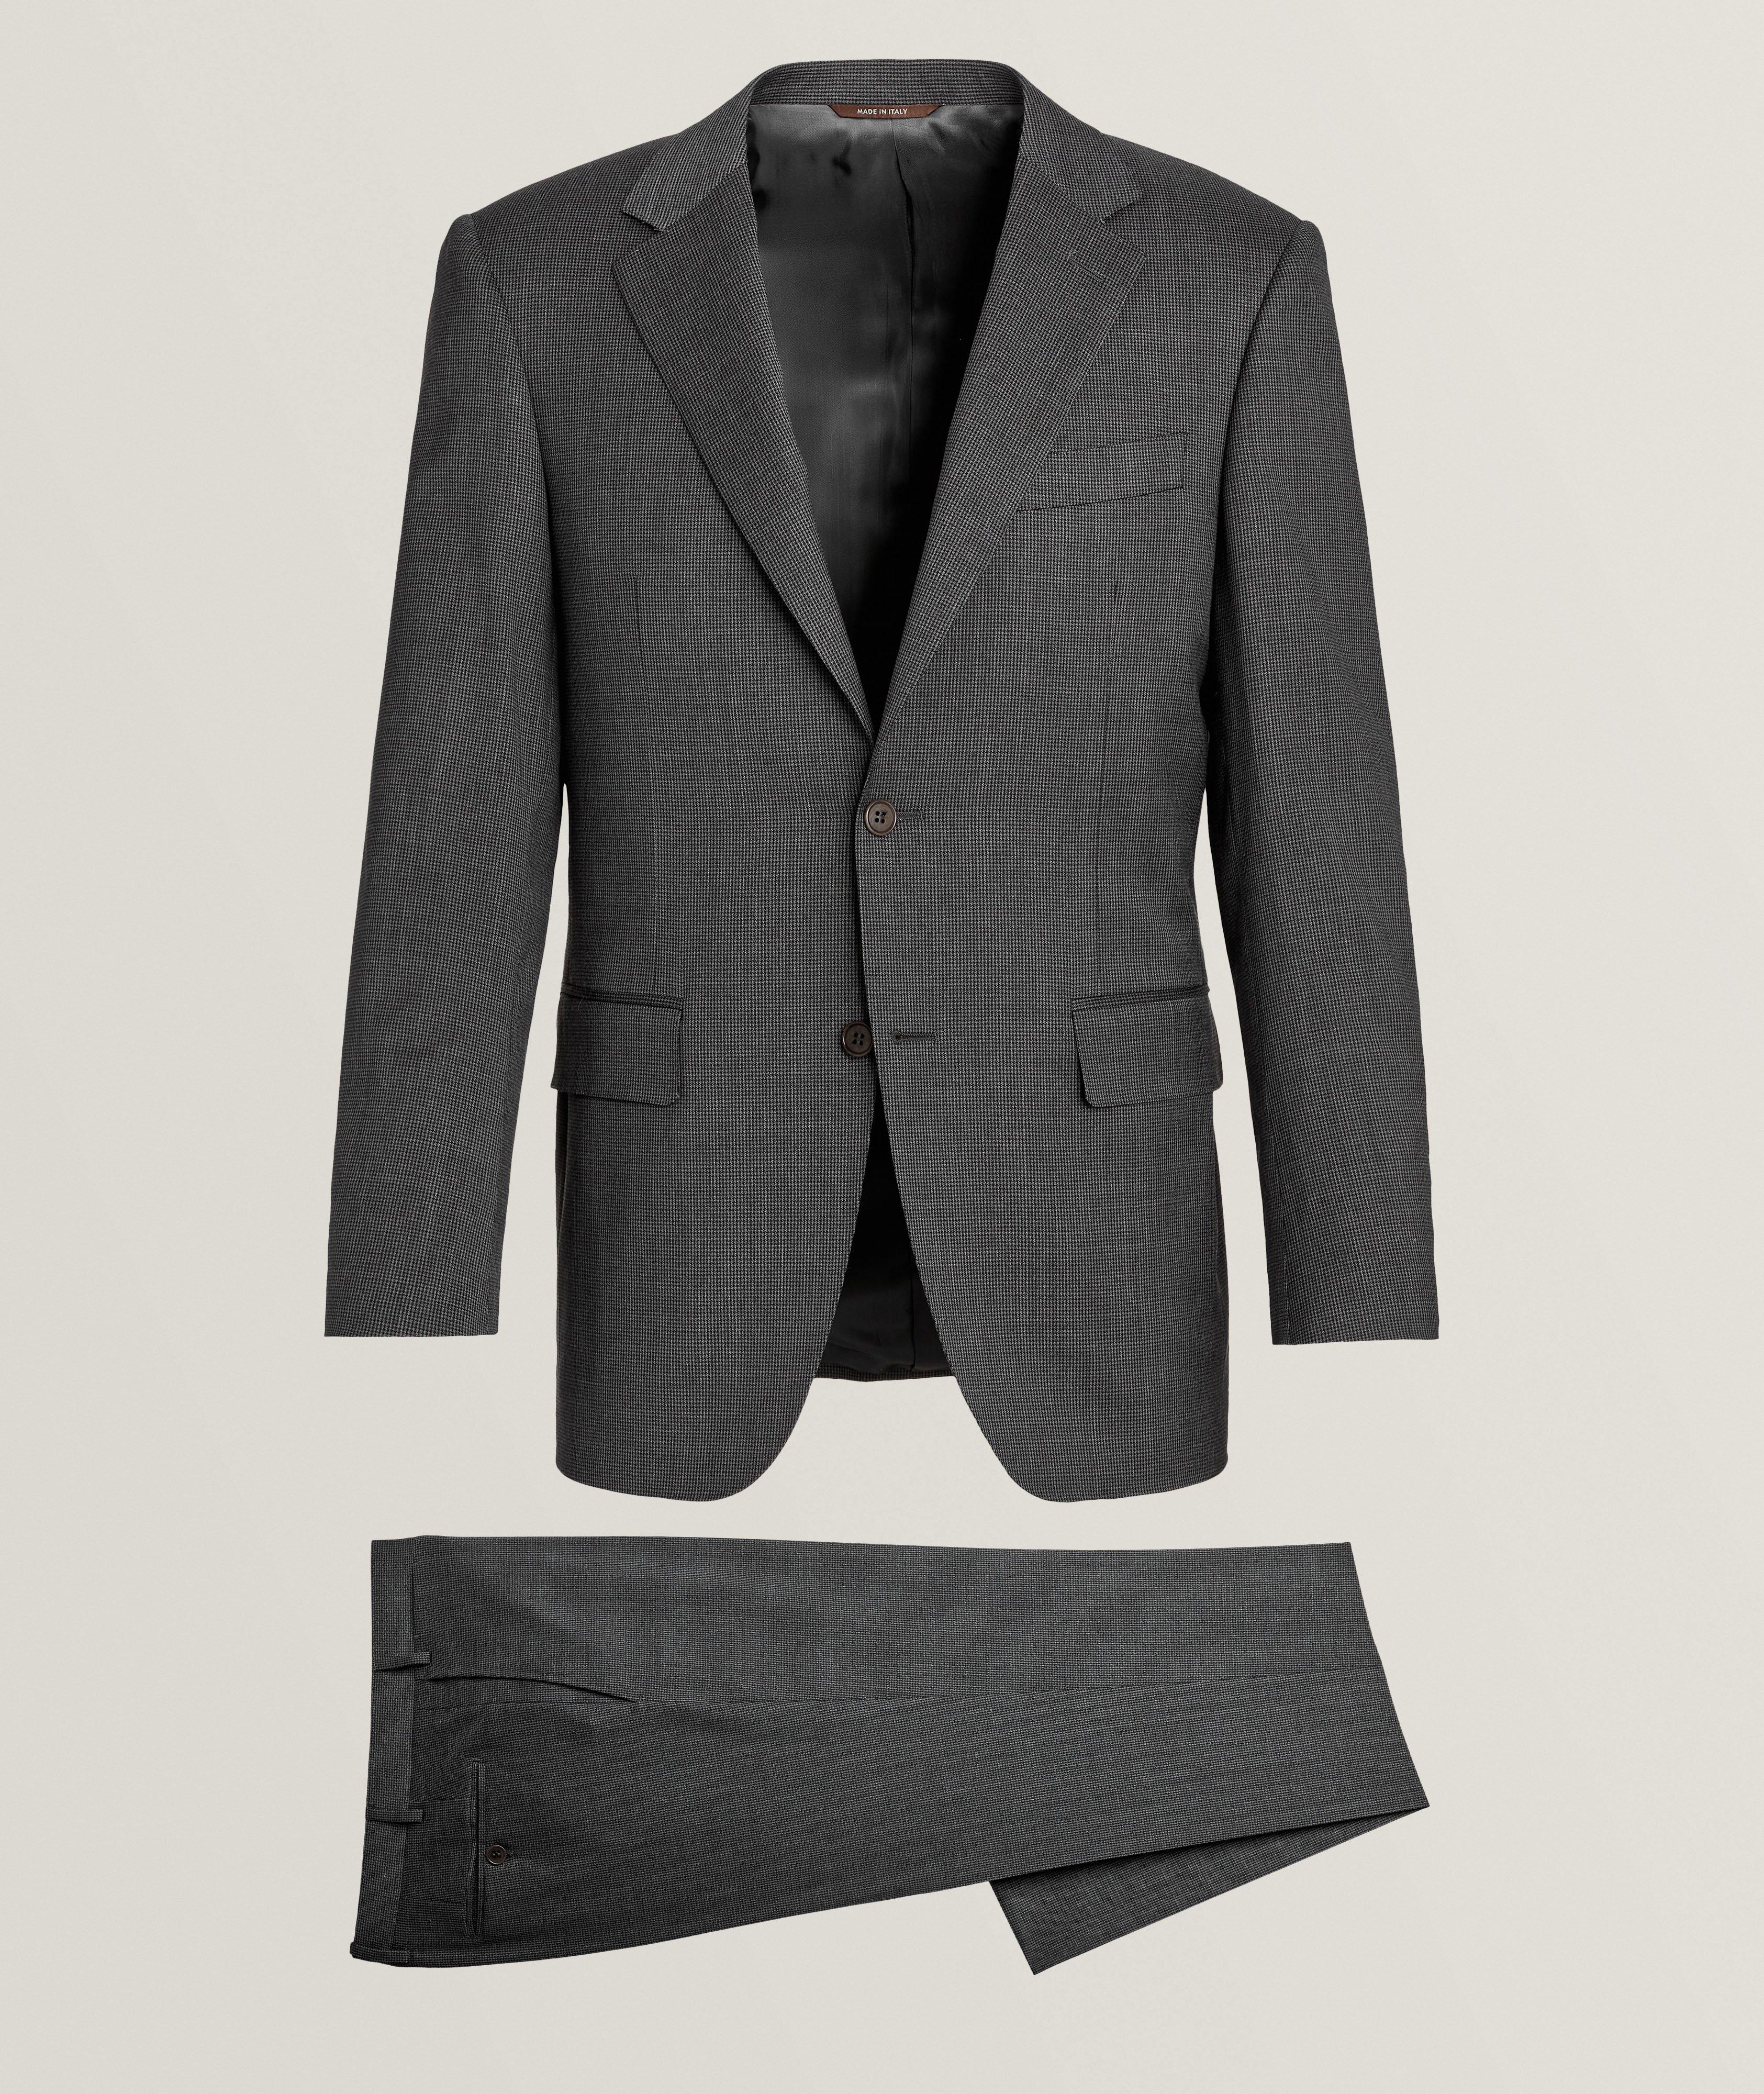 Black Edition Miniature Houndstooth Stretch-Wool Suit image 0